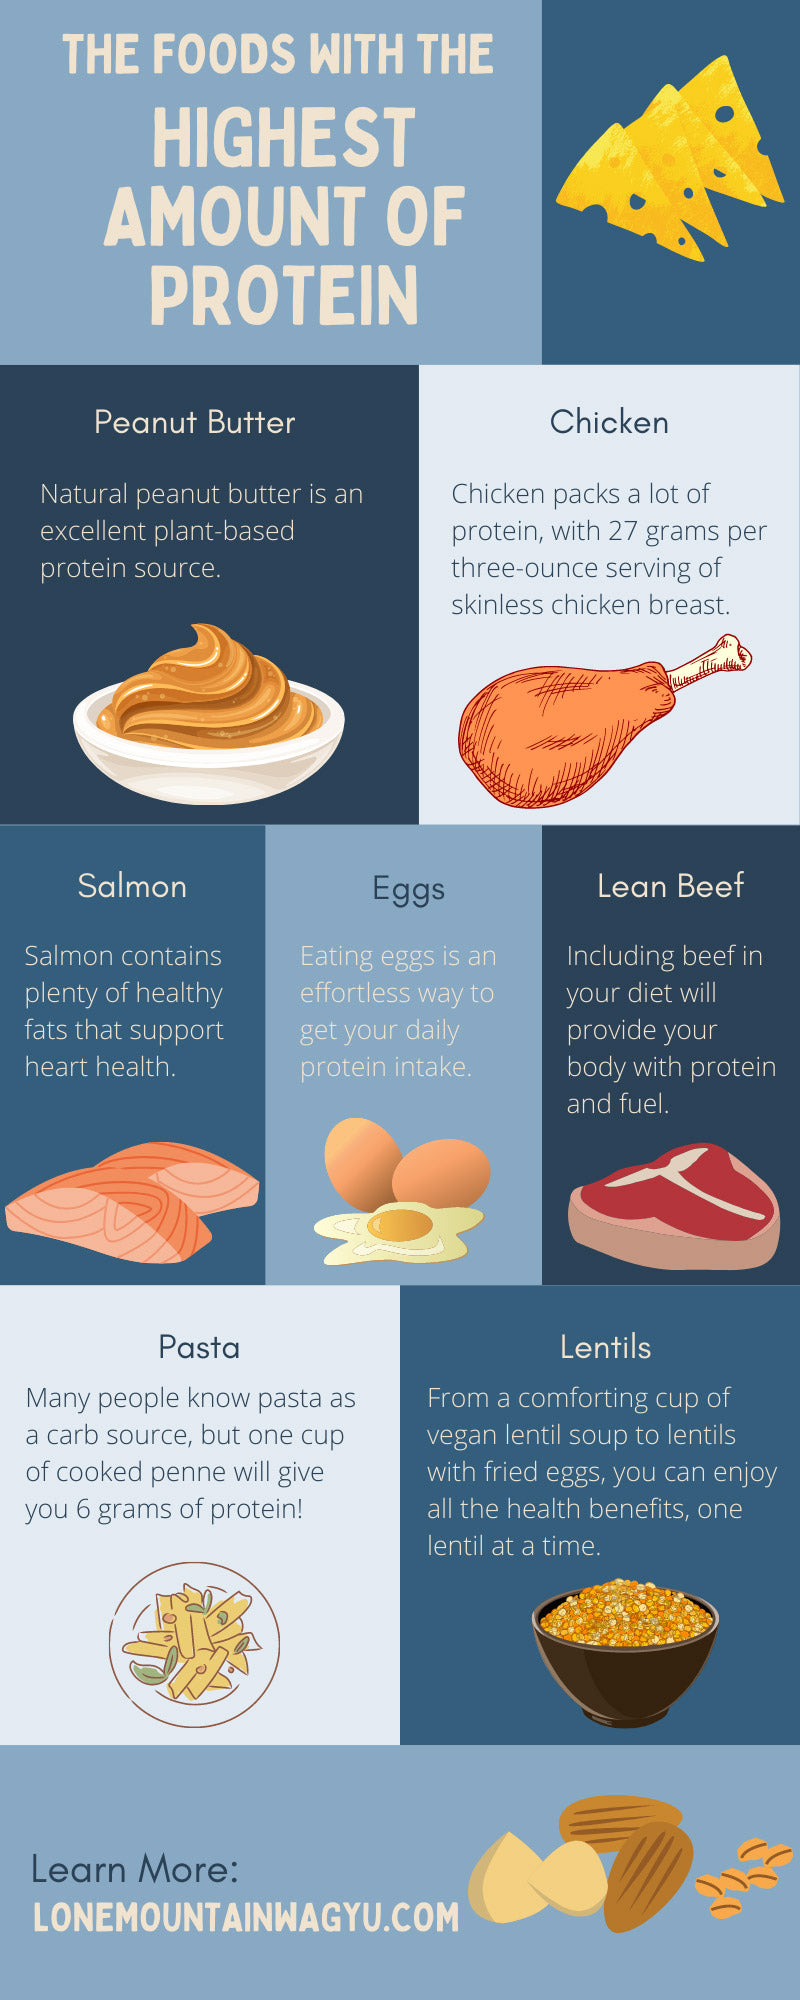 The Foods With the Highest Amount of Protein